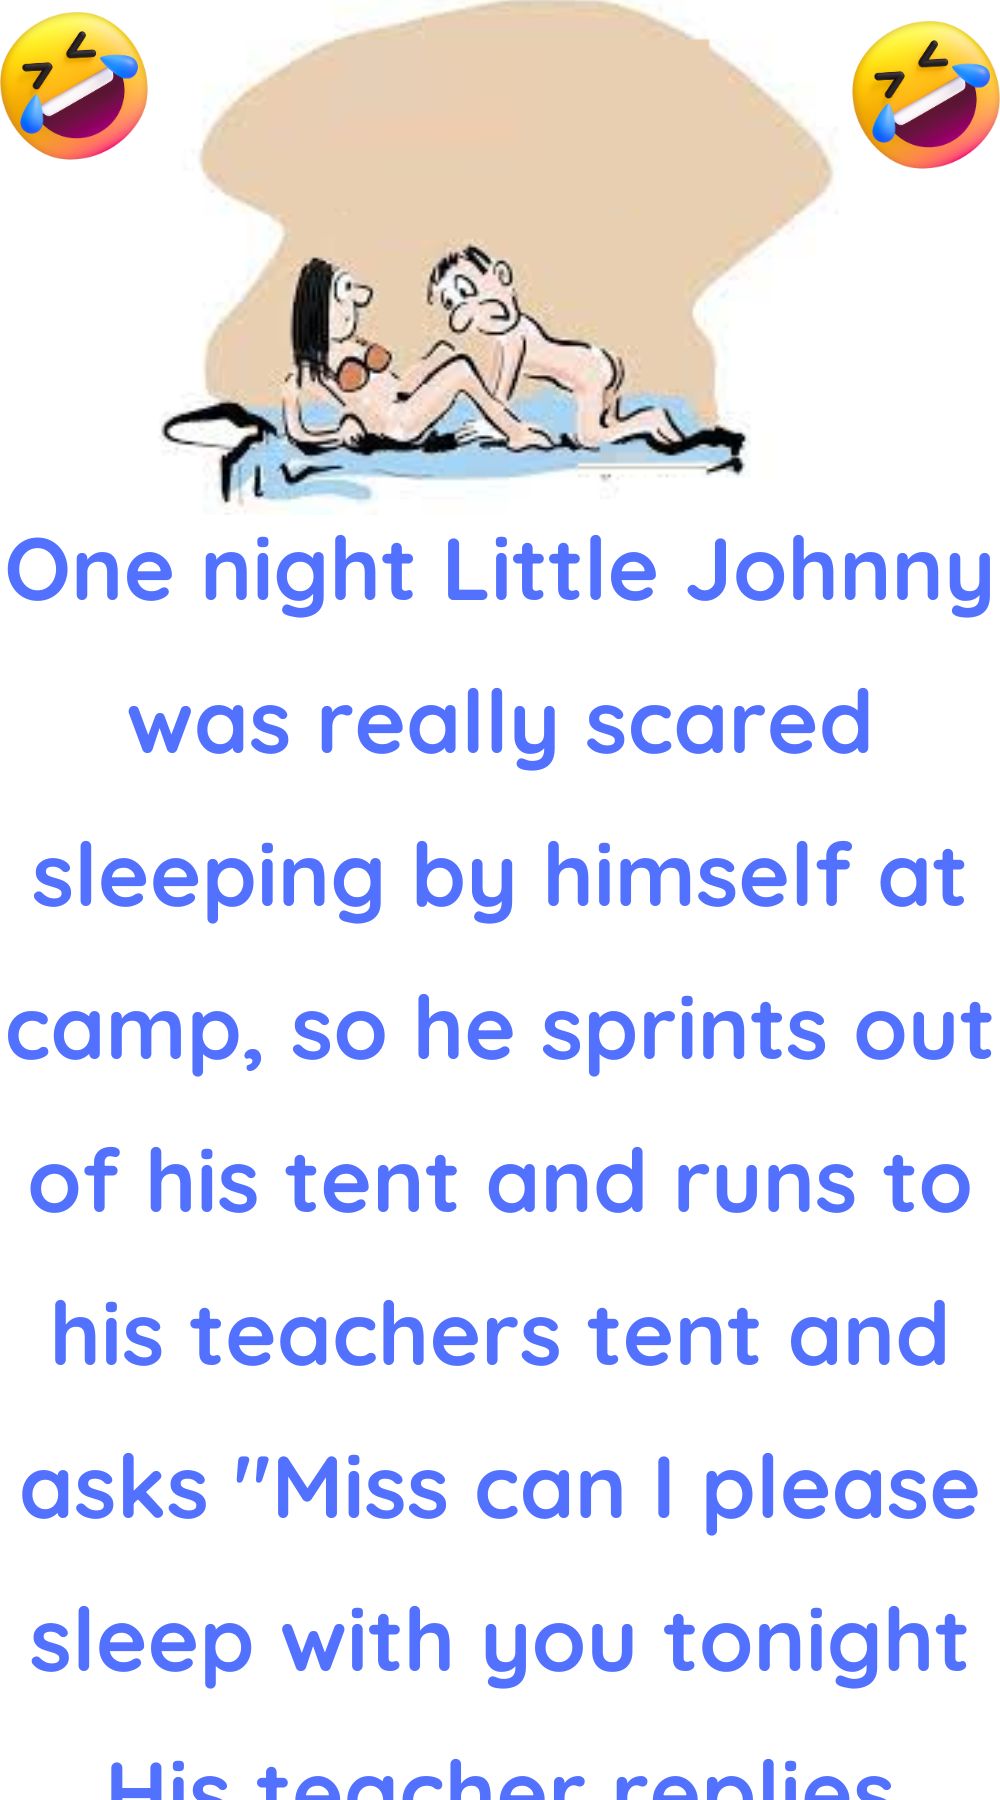 Johnny jumps into bed - Funny Story